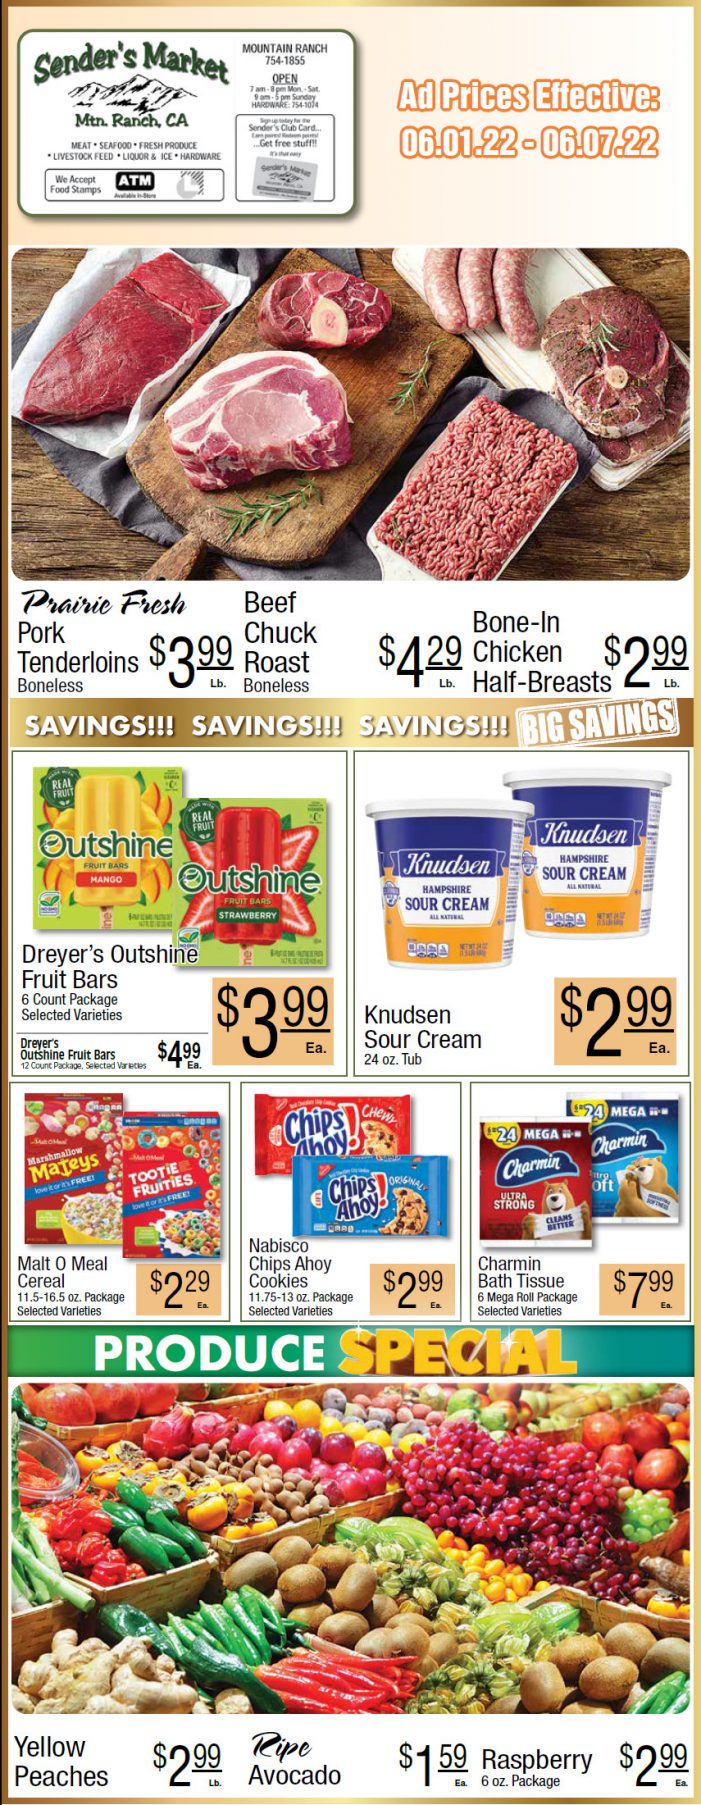 Sender’s Market Weekly Ad & Grocery Specials Through June 7th! Shop Local & Save!